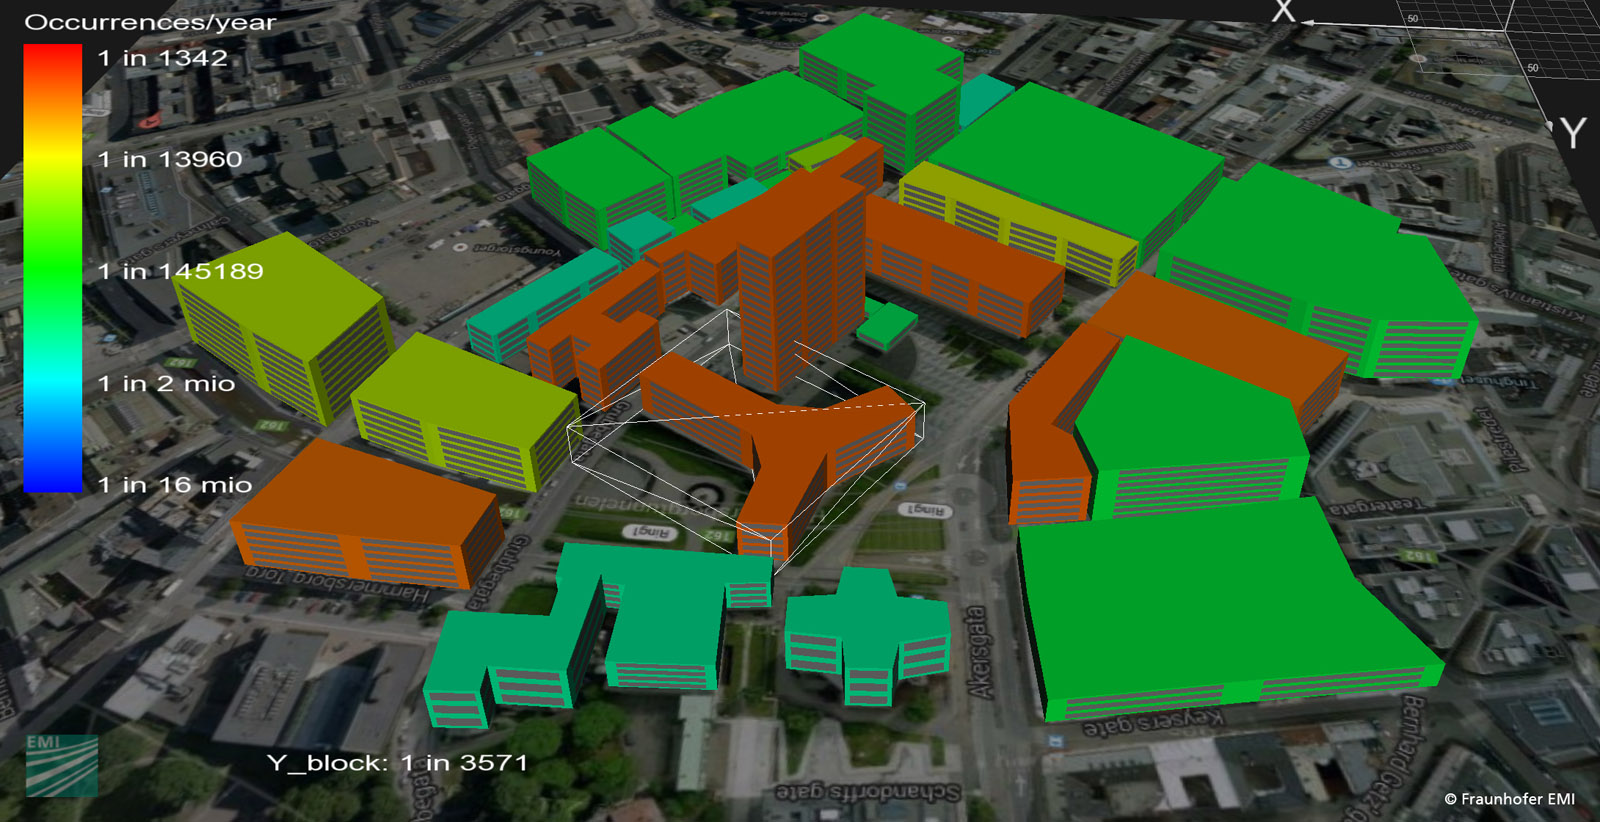 Risk analysis of an urban area in Oslo which includes empirical data on the use of buildings. 